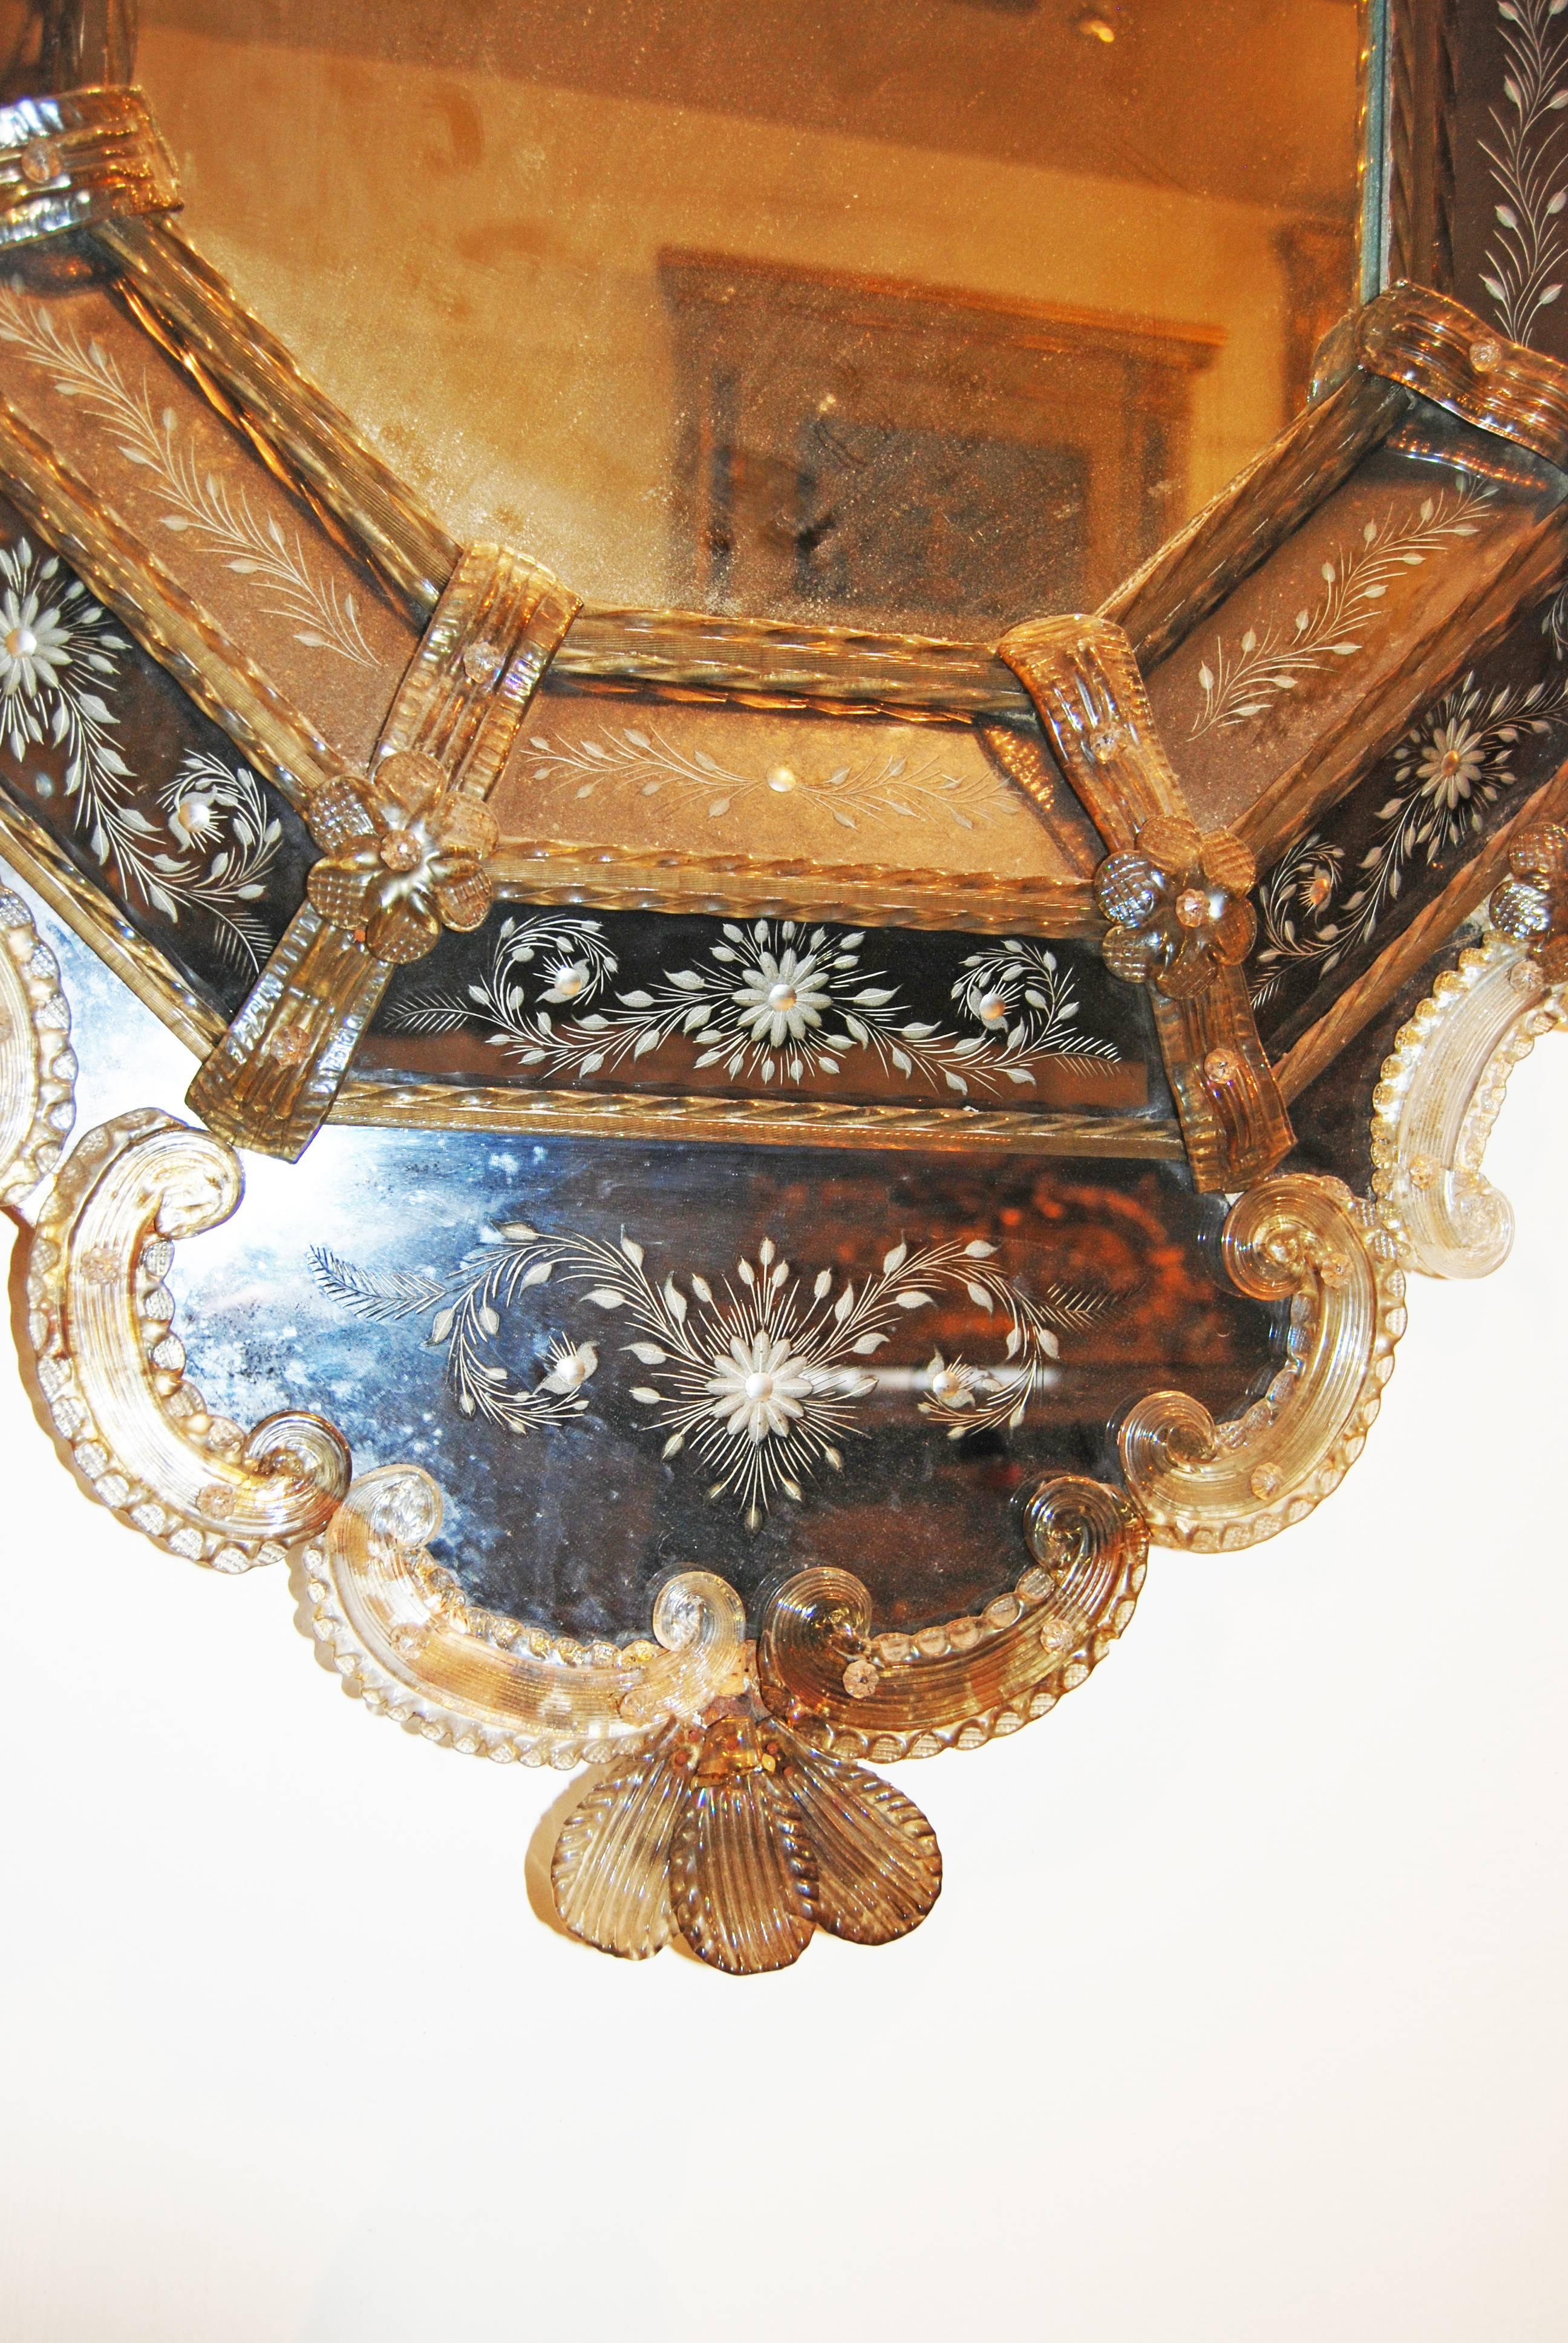 19th century Venetian mirror with Murano glass accents.